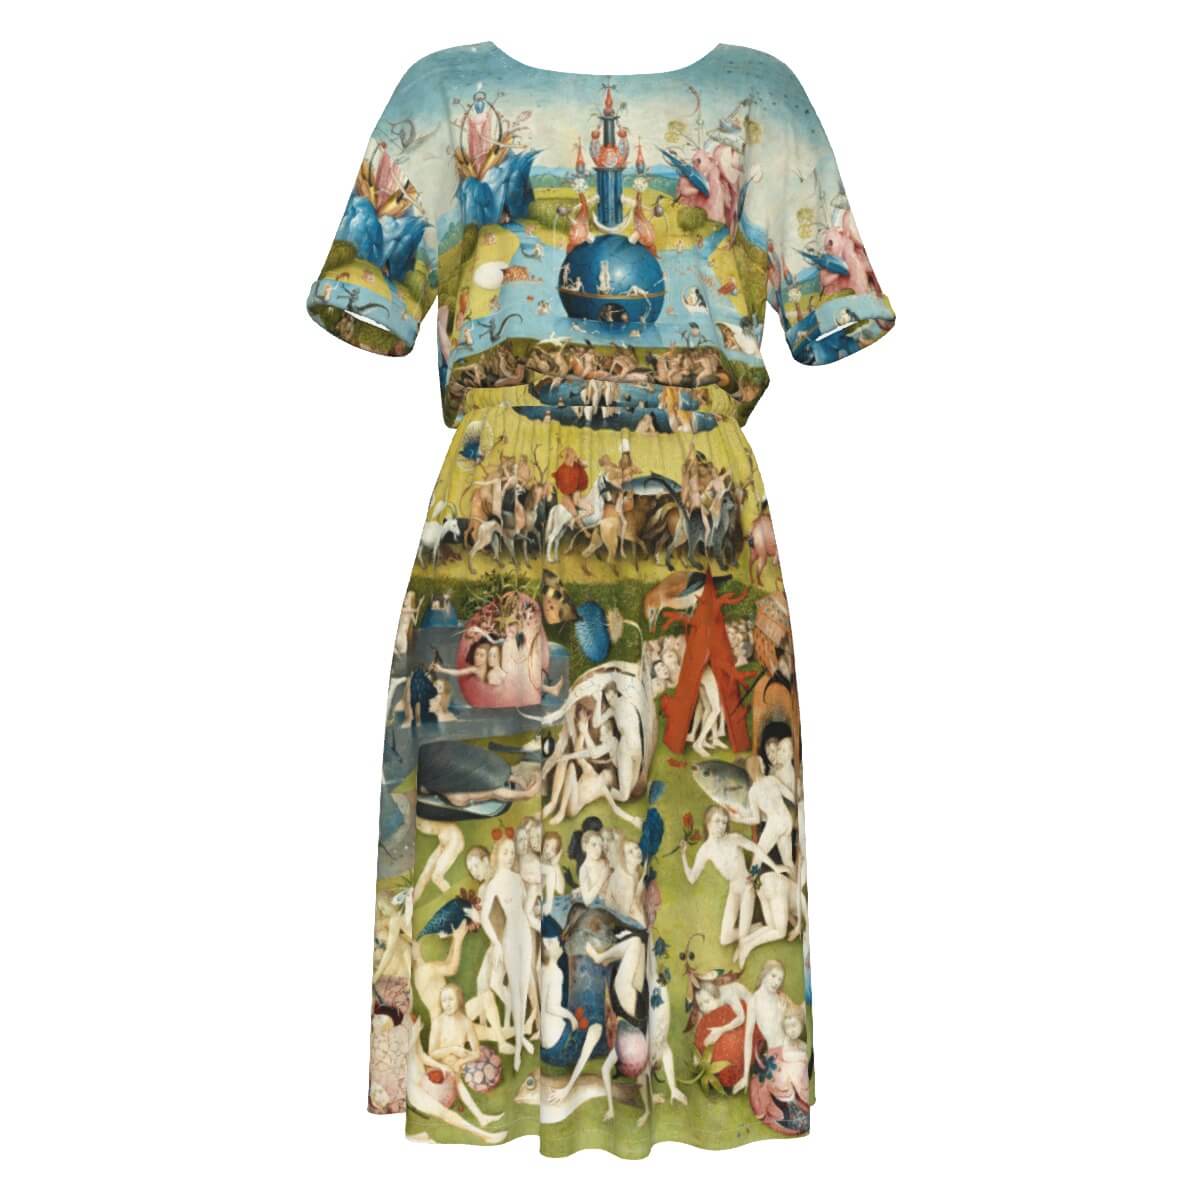 Hieronymus Bosch Earthly Delights Dress